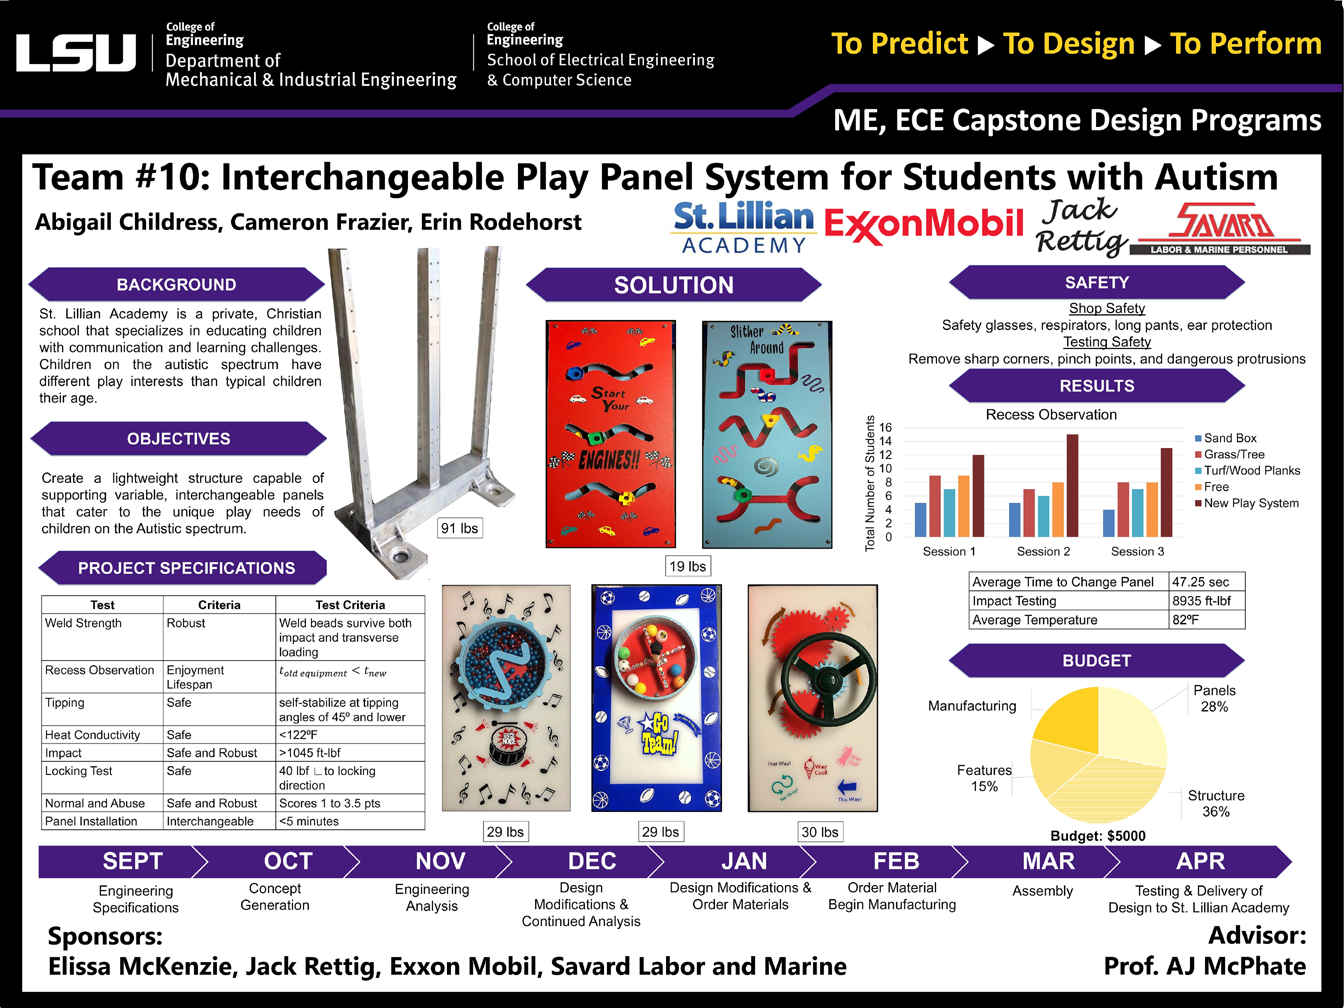 Project 10: Interchangeable panel Play System for children who have Autism (2019)